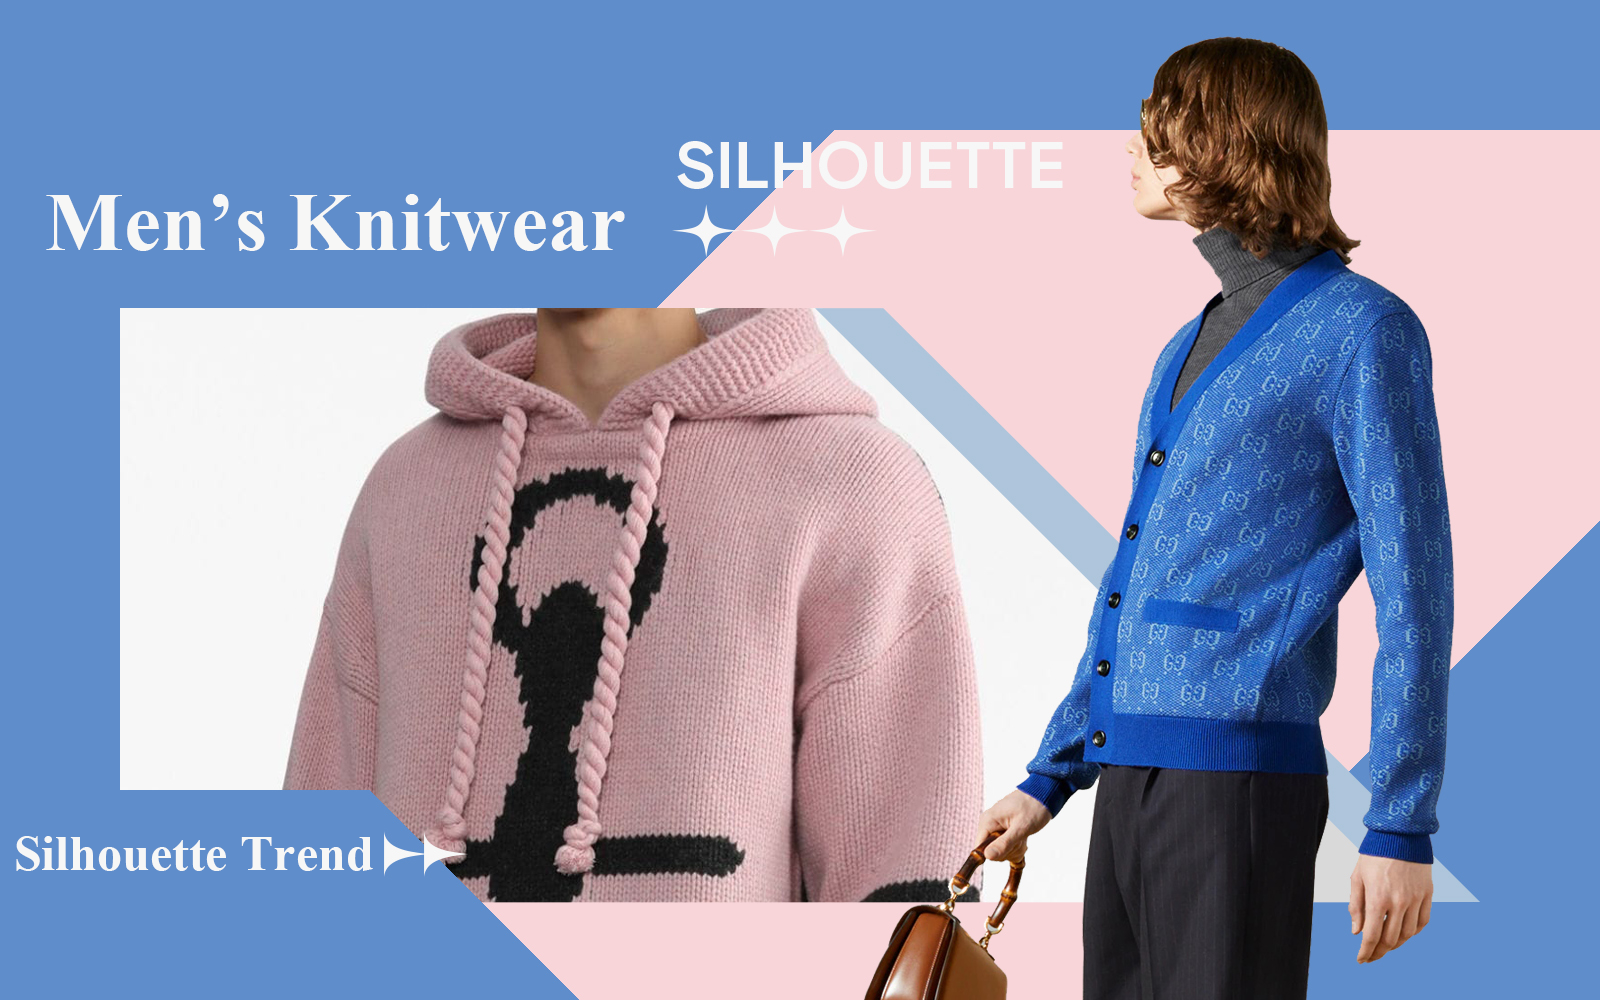 The Silhouette Trend for Men's Knitwear